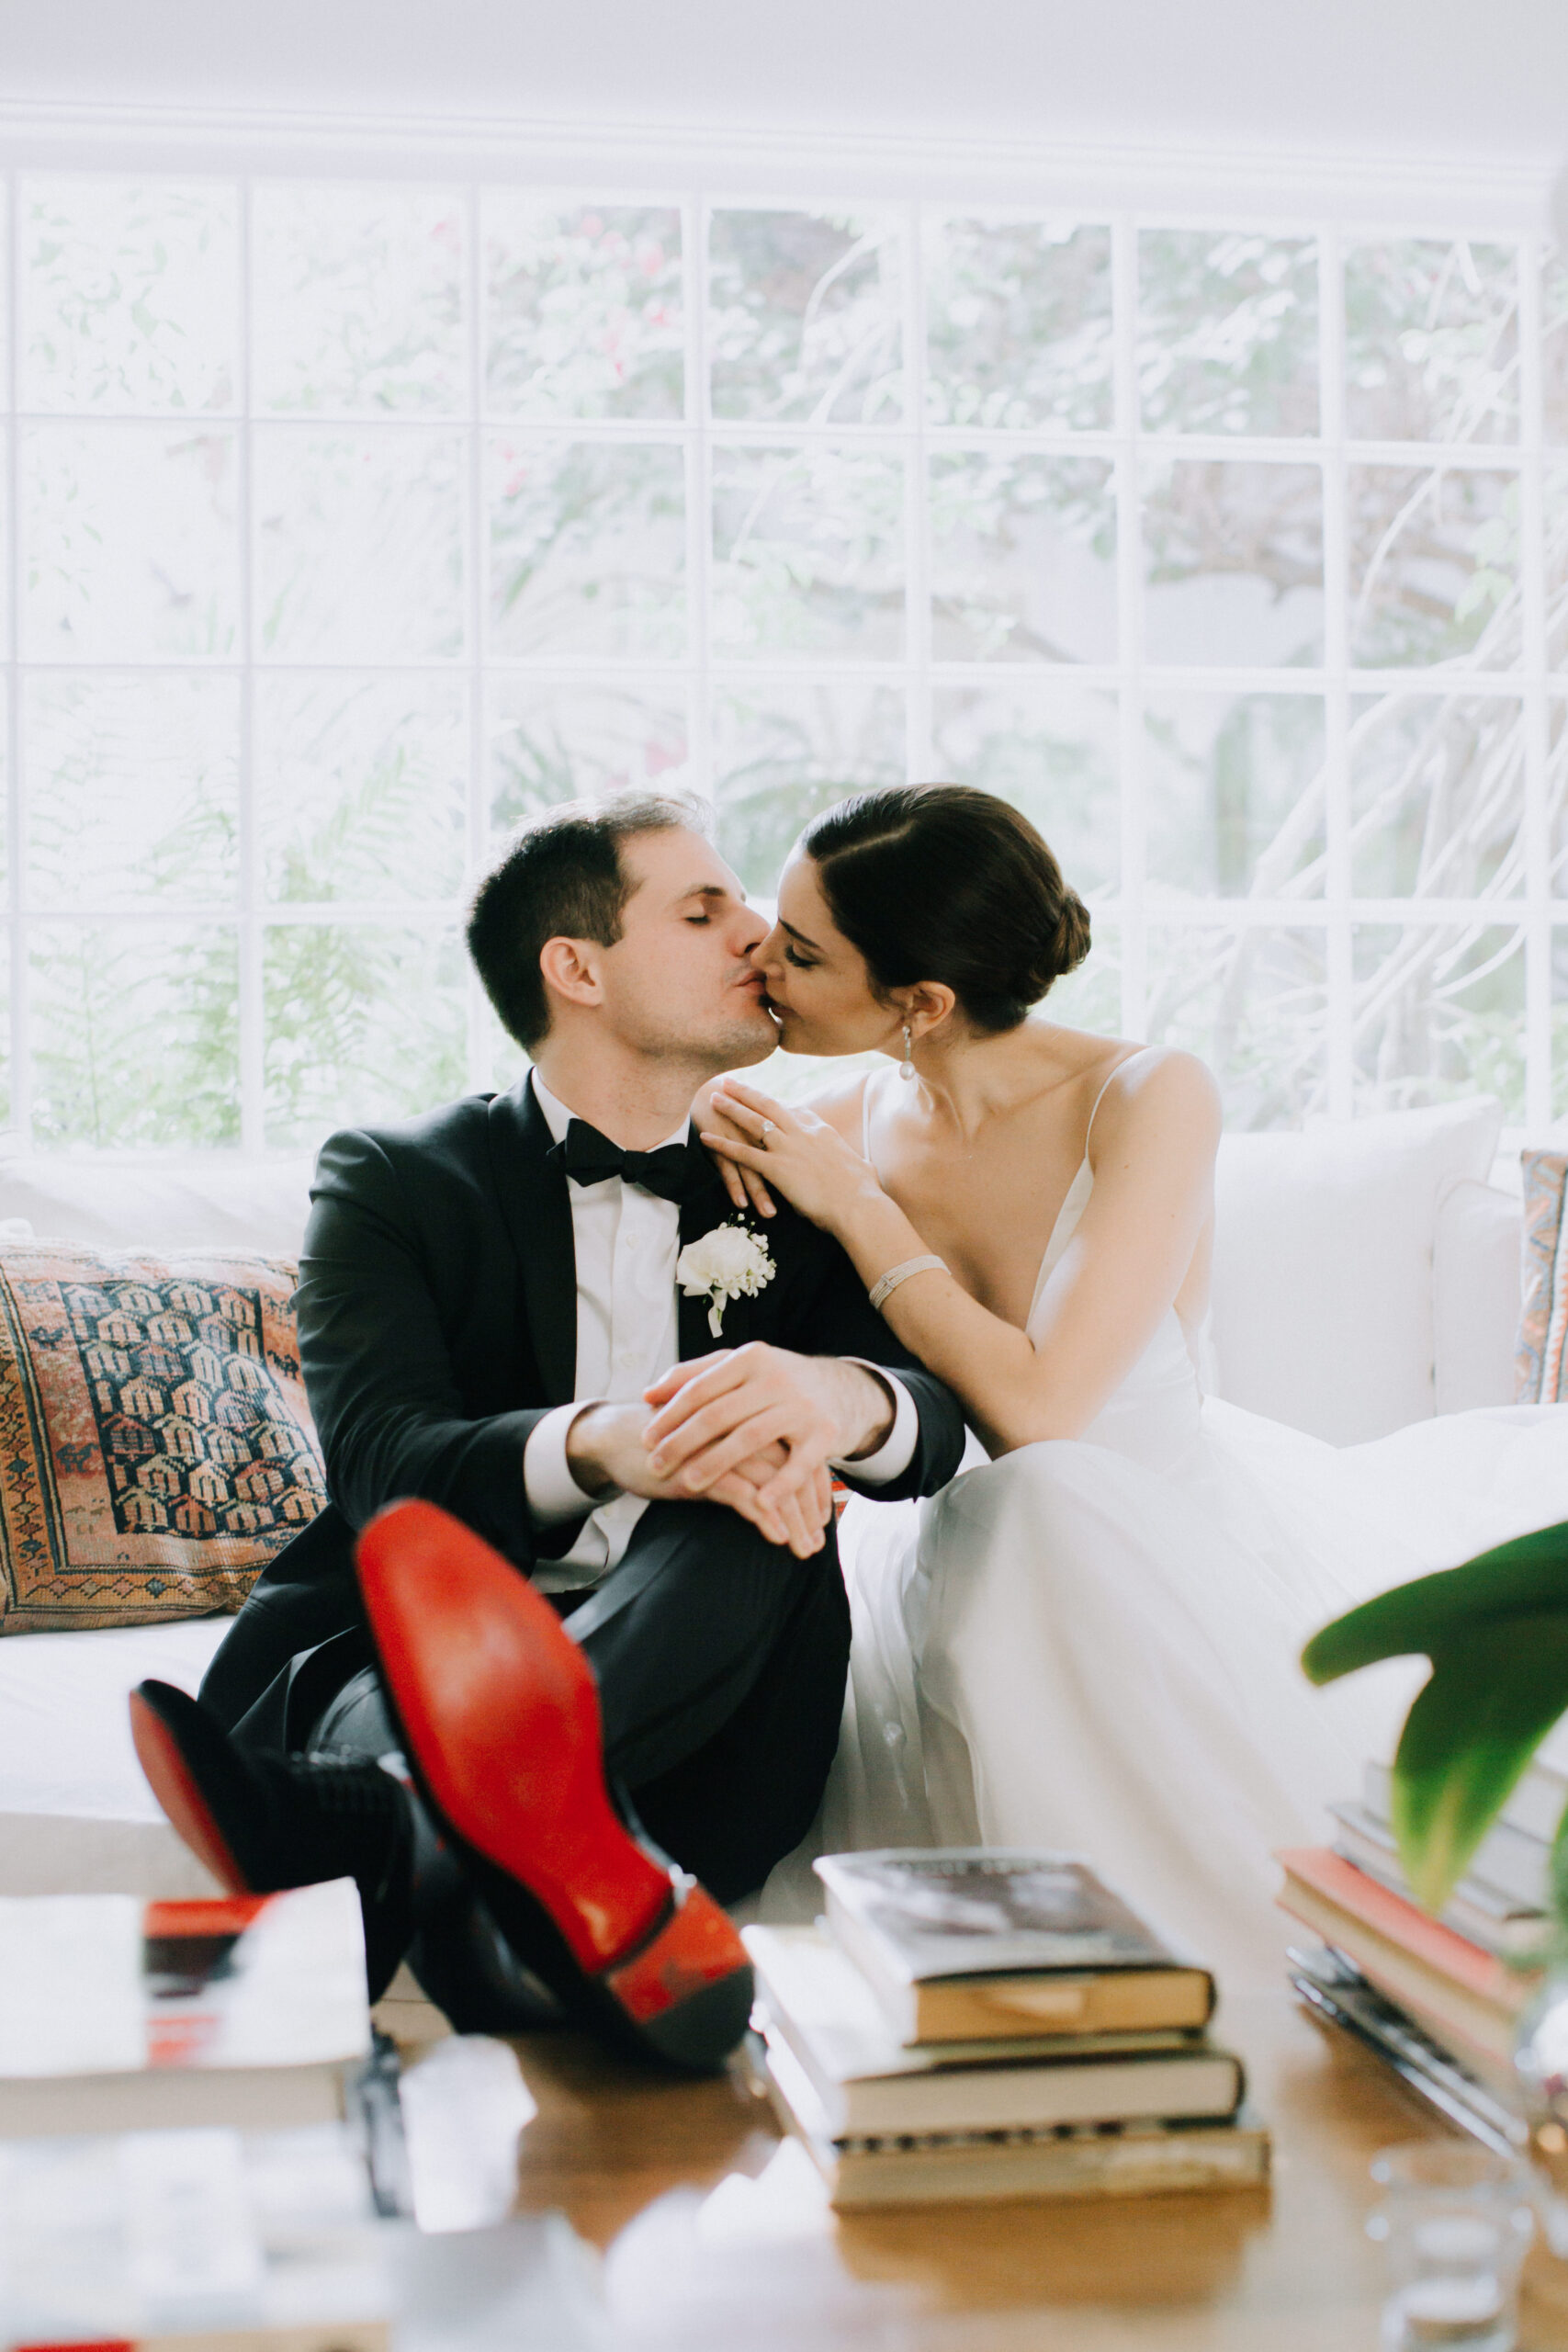 bride and groom share a kiss before their dreamy backyard wedding ceremony